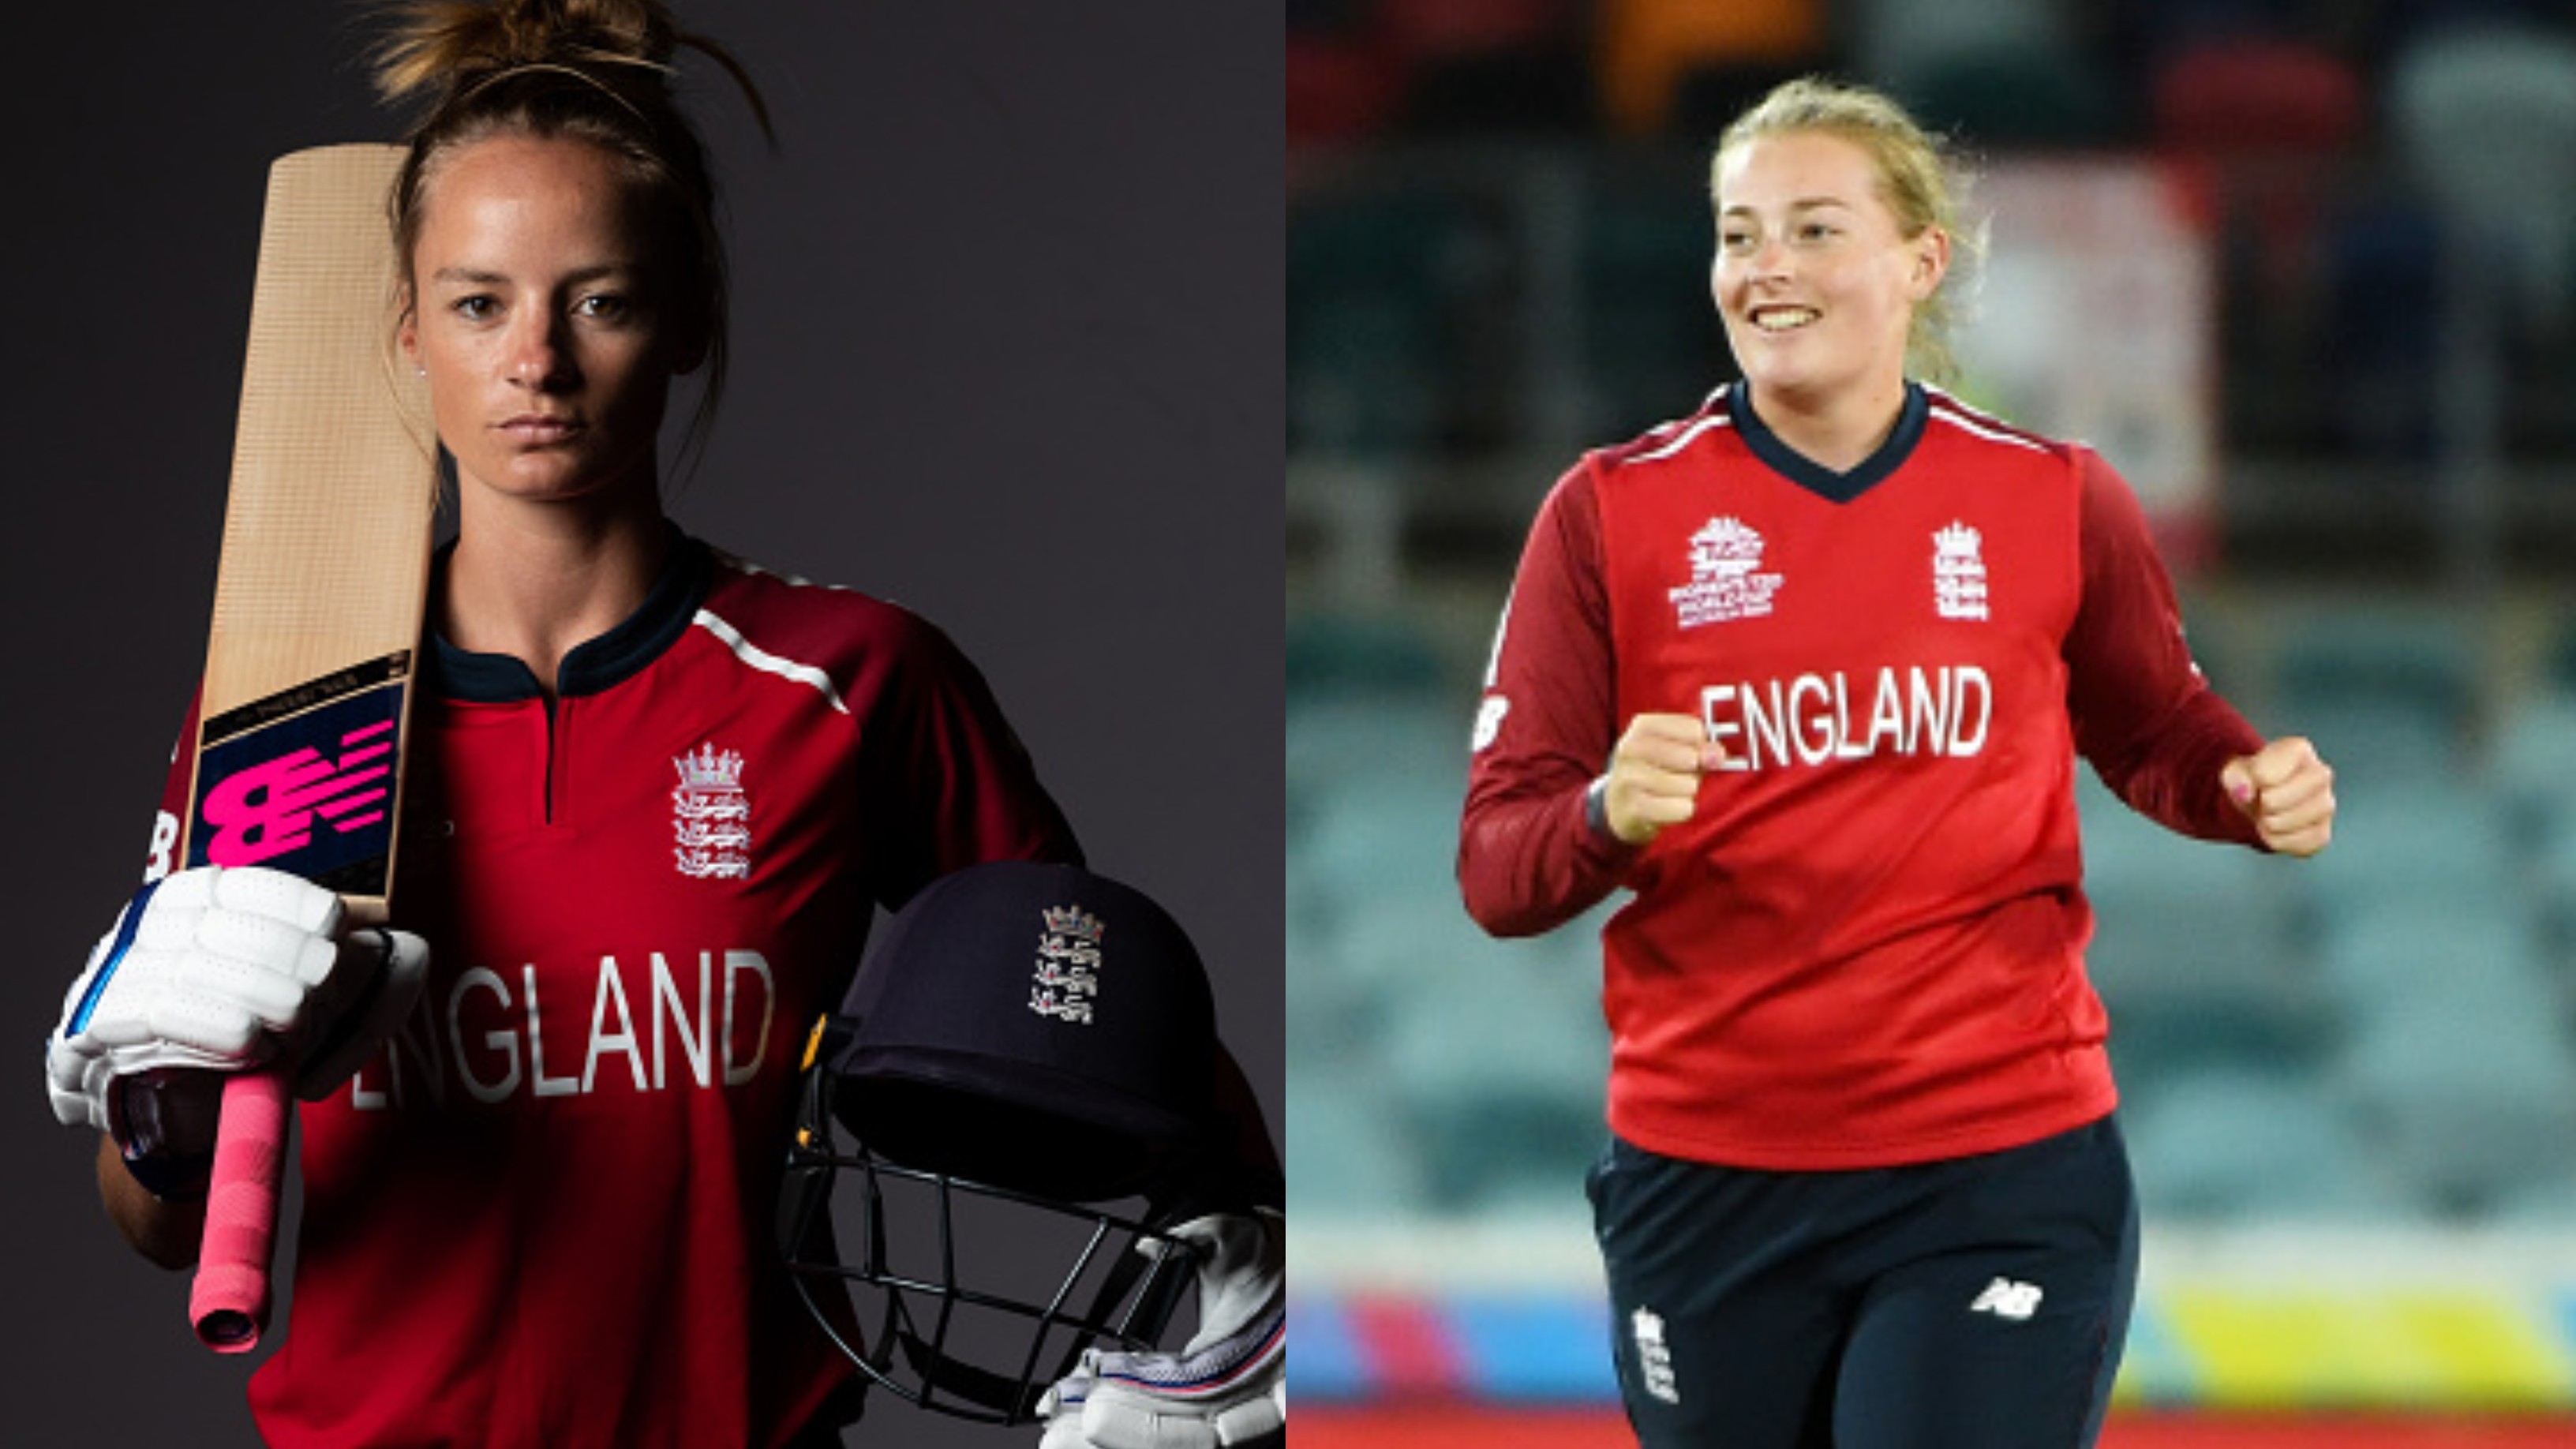 England’s Sophie Ecclestone and Danni Wyatt likely to feature in Women's Challenger series in UAE